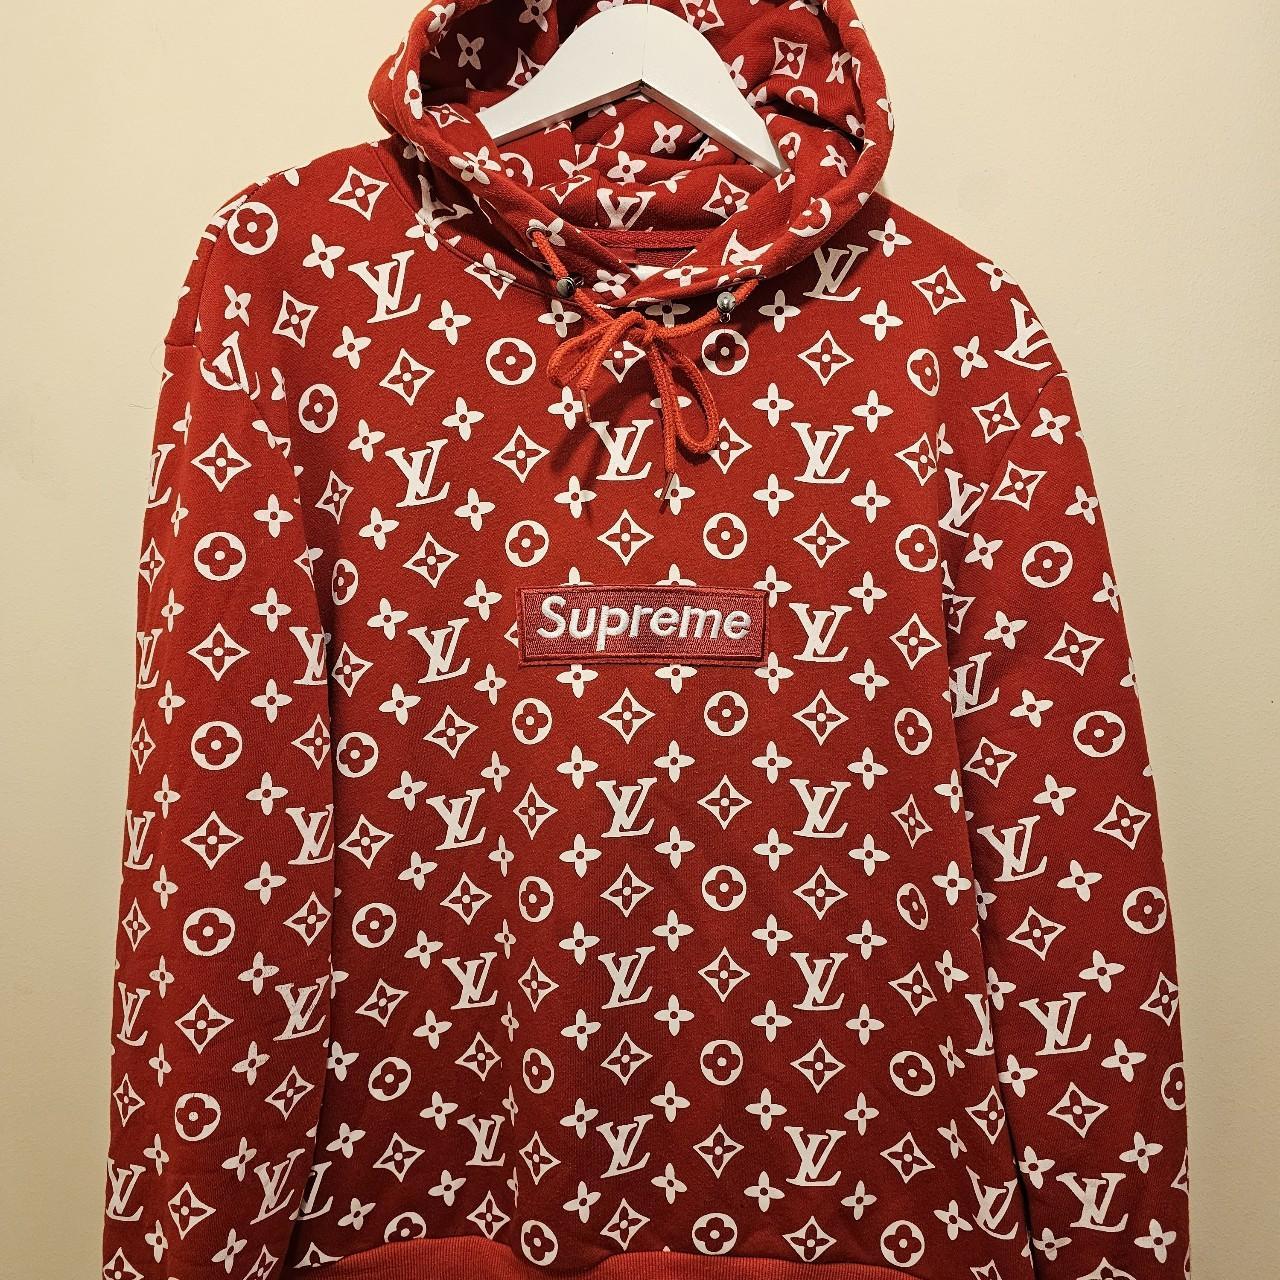 2020 Red Supreme x Louis Vuitton Hoodie This is NOT... - Depop